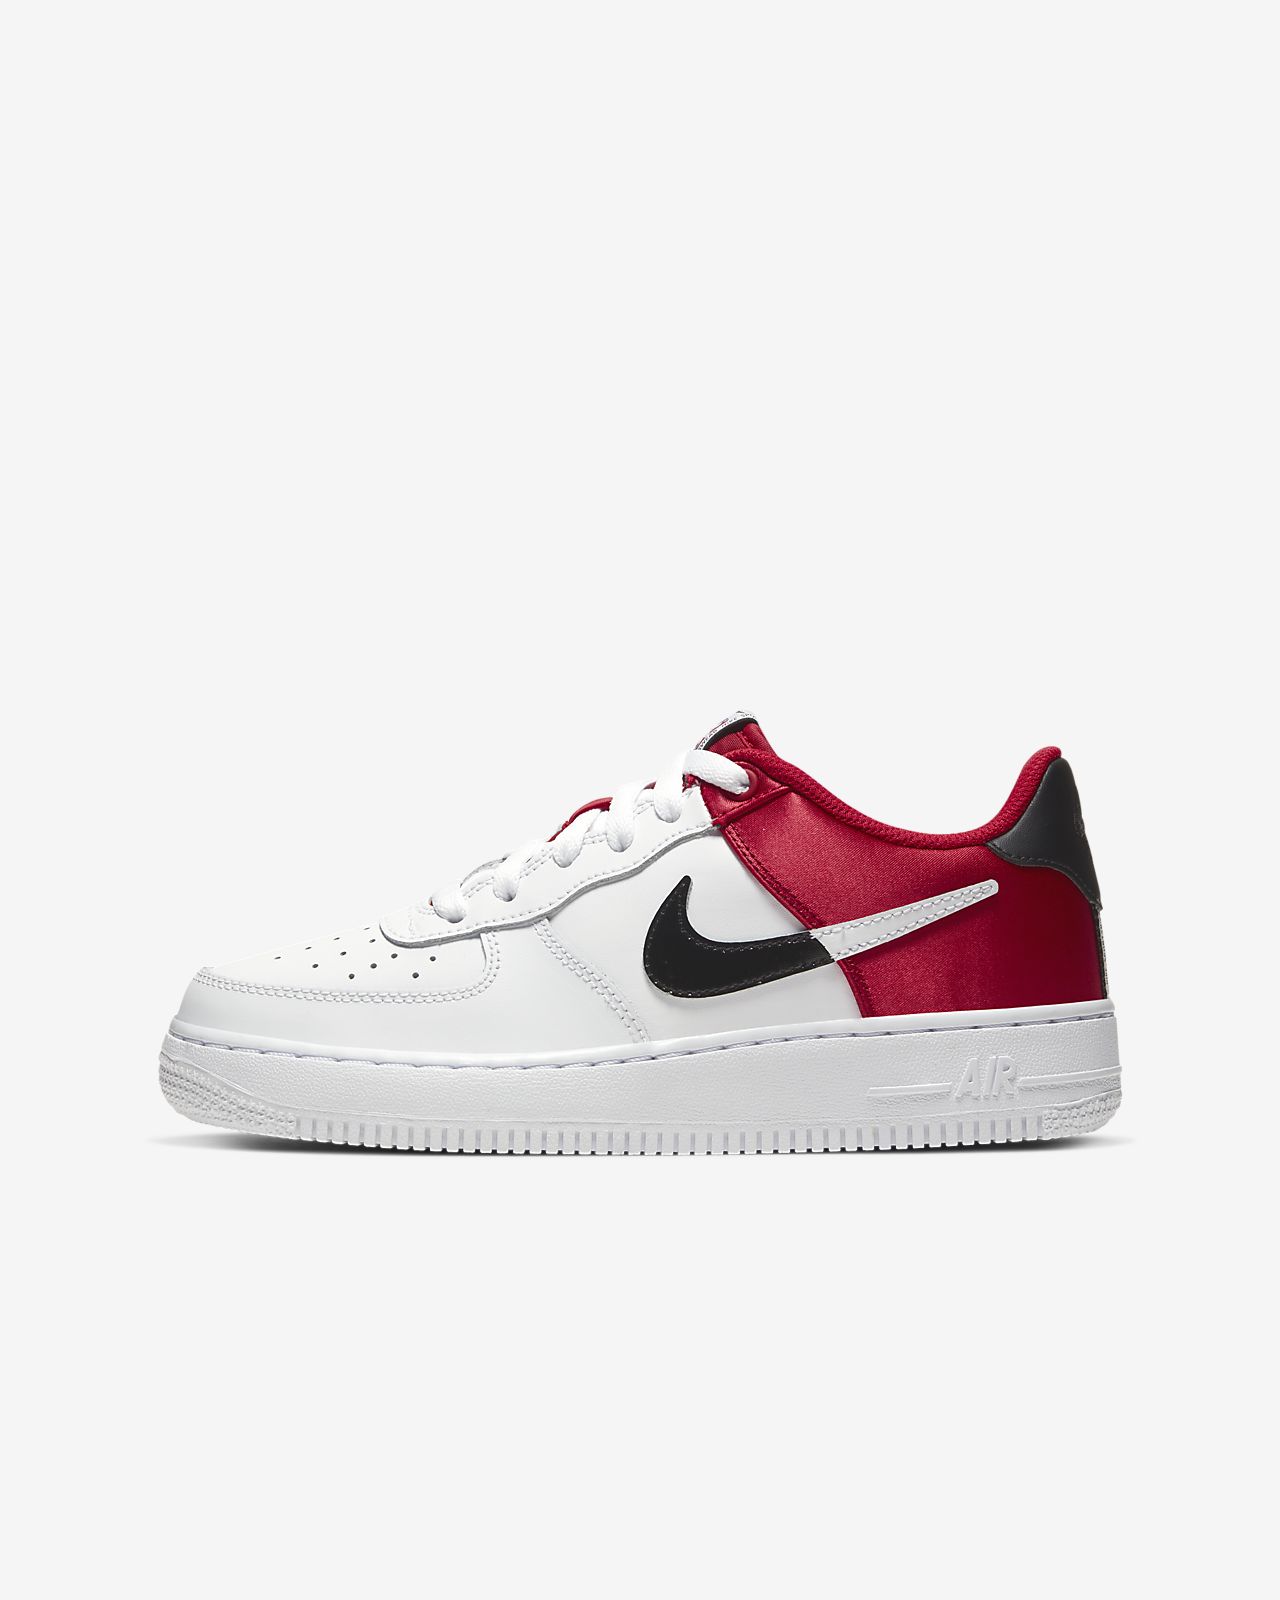 air force 1 low nba white red